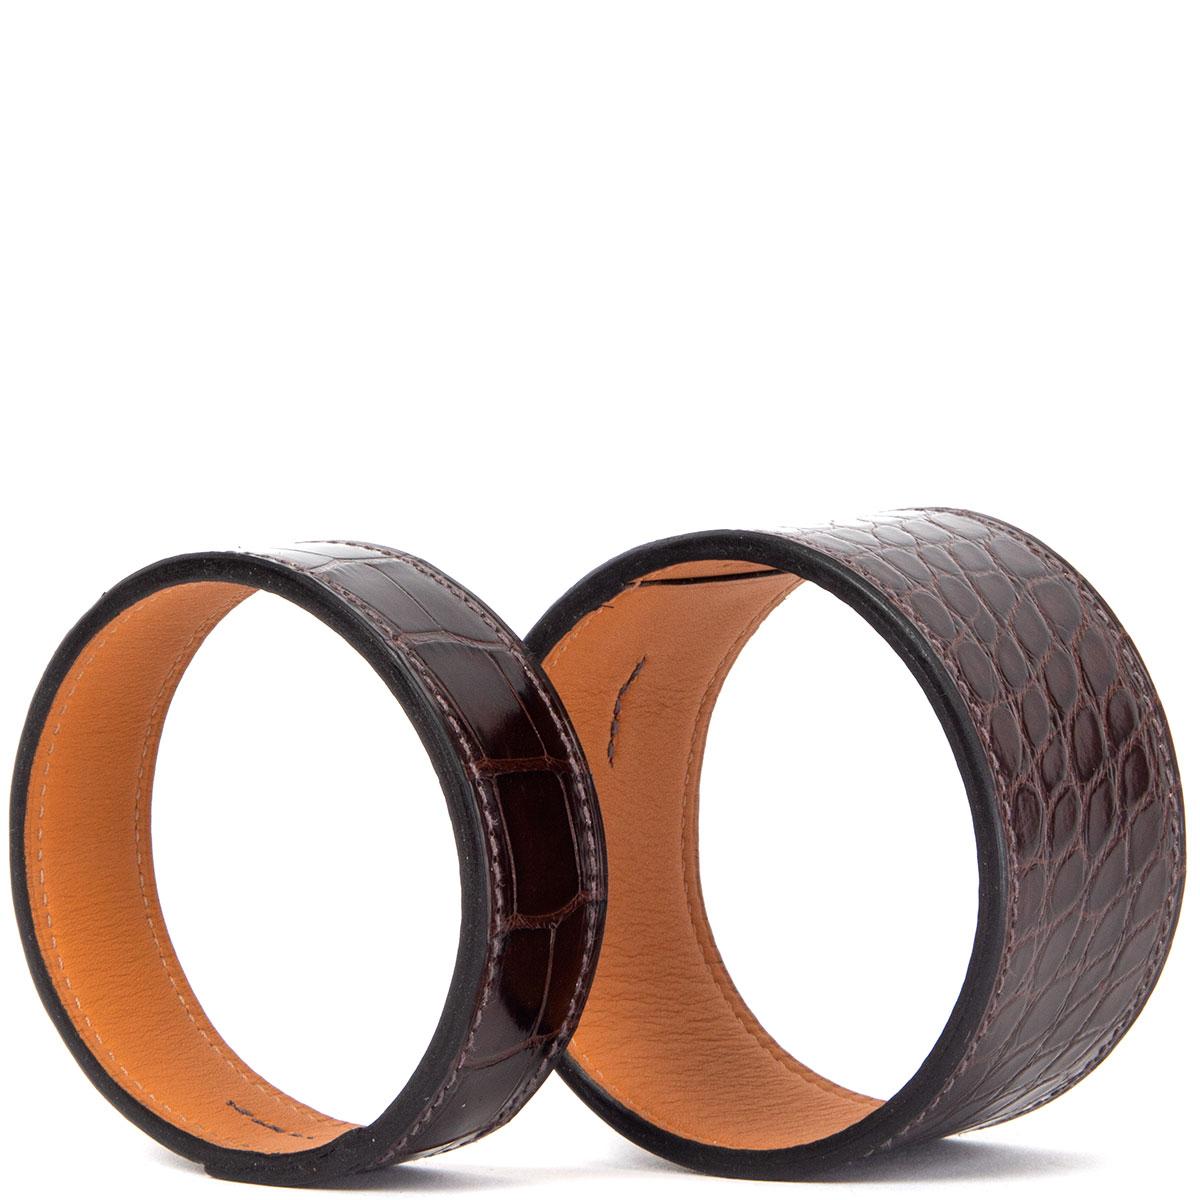 100% authentic Hermes 'Neo' bangles in Havane (dark brown) shiny crocodile leather. Set of two PM & GM. Have been worn and are in excellent condition. Come with box.

Measurements
Tag Size	M
Circumference	19.5cm (7.6in)

All our listings include